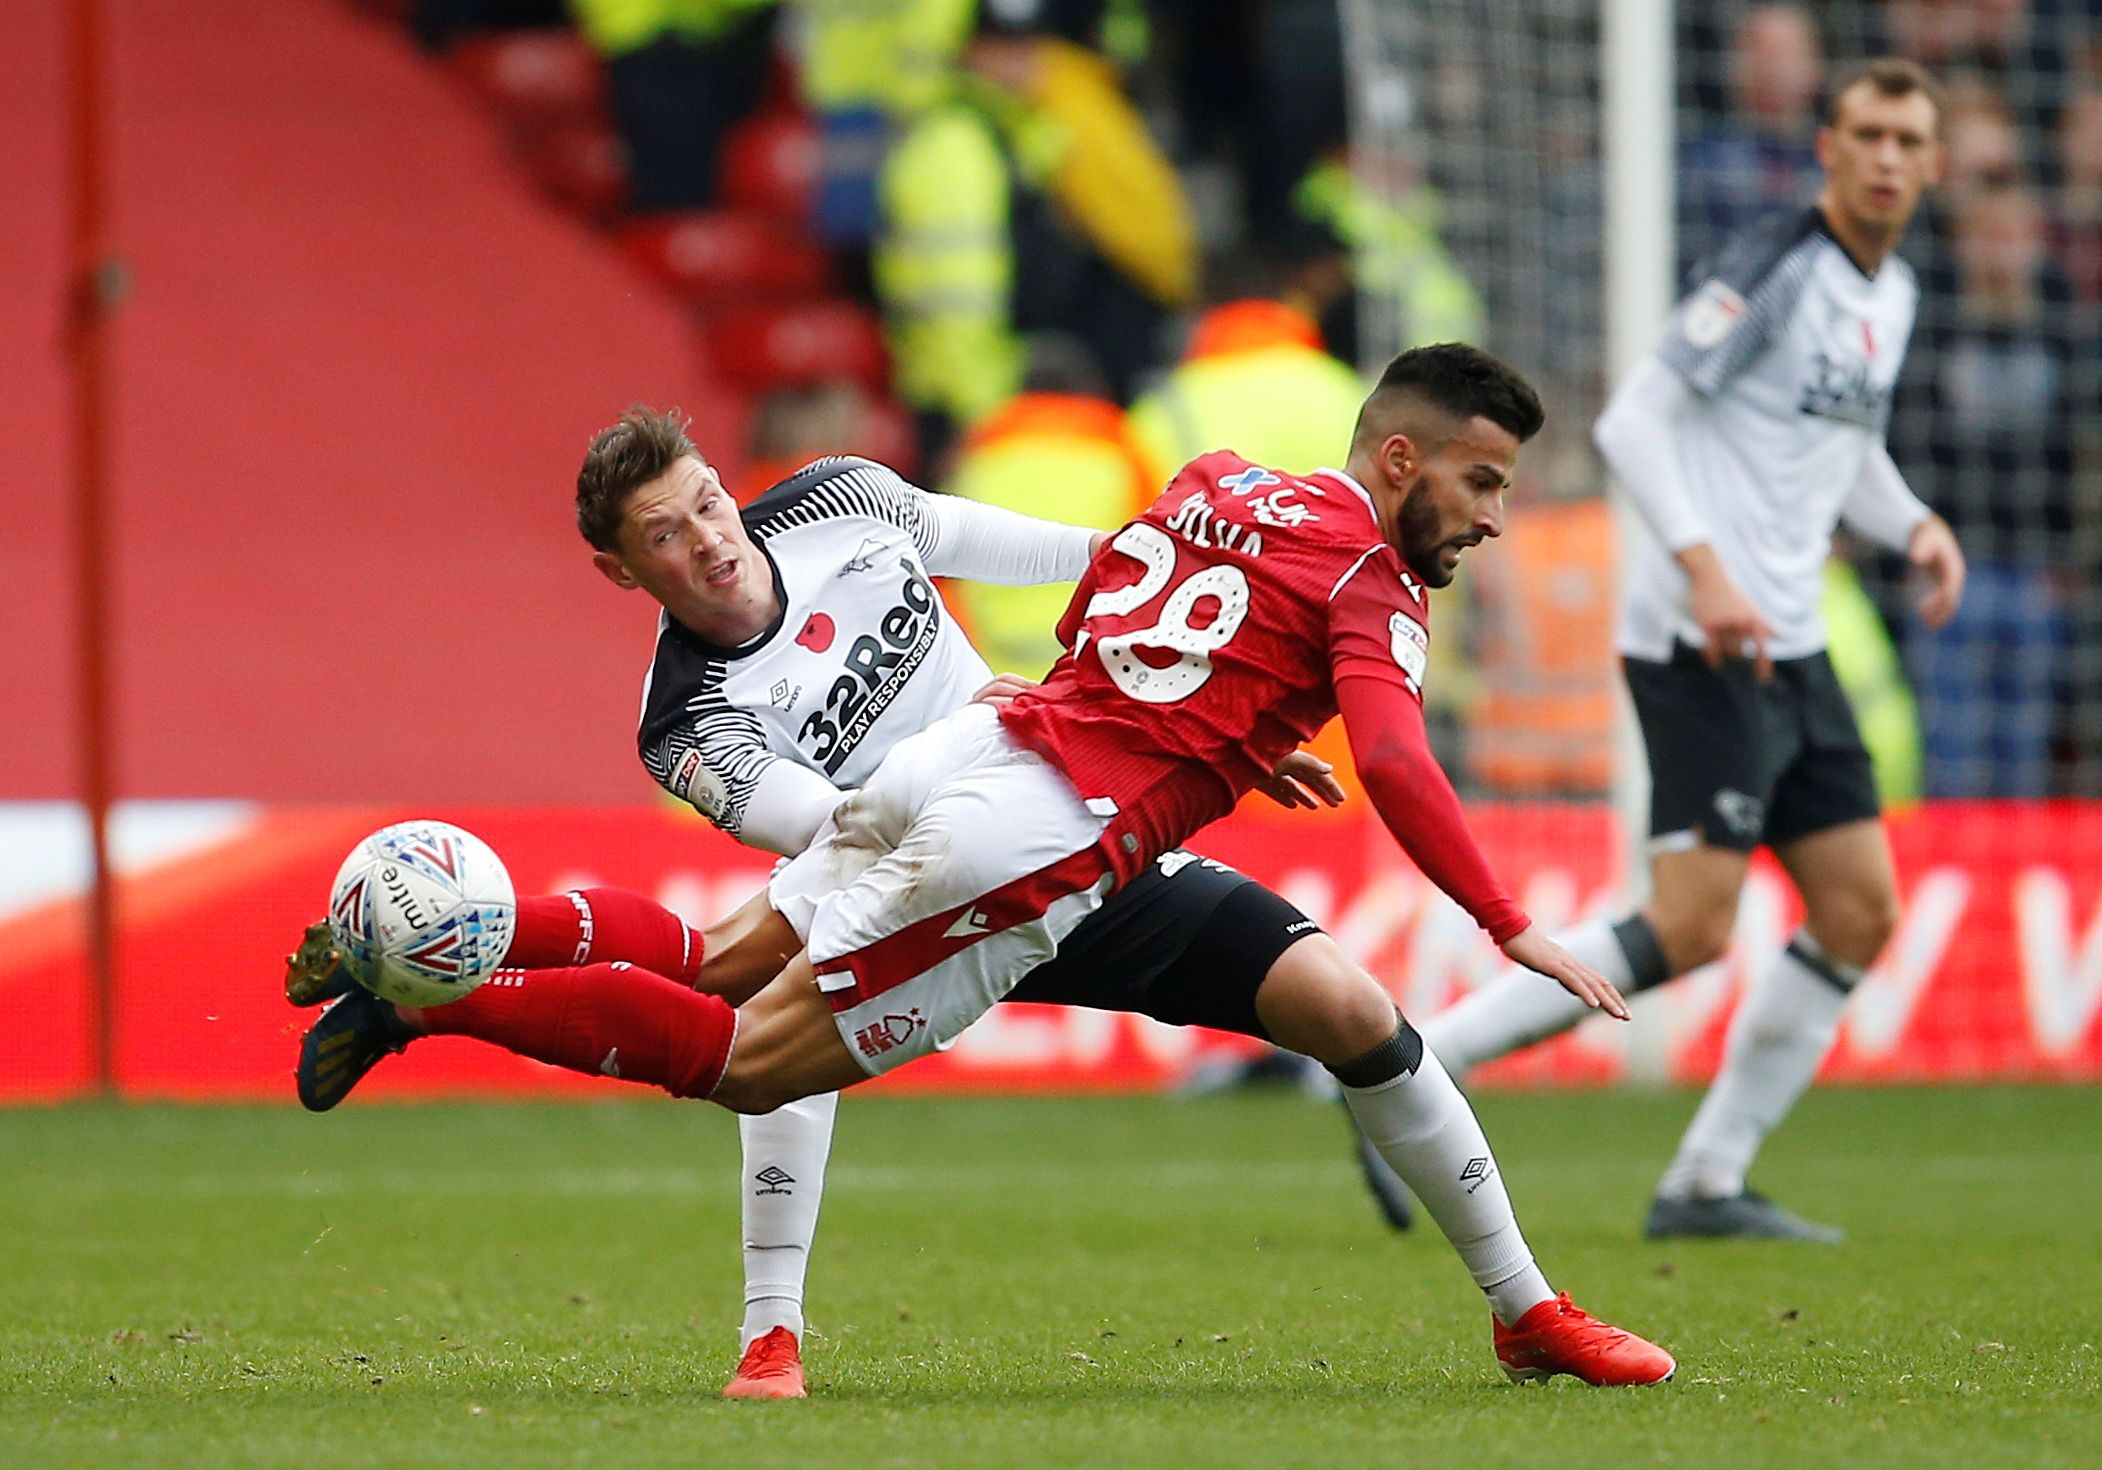 Soccer Football - Championship - Nottingham Forest v Derby County - The City Ground, Nottingham, Britain - November 9, 2019   Nottingham Forest's Tiago Silva in action with Derby County's George Evans    Action Images/Craig Brough  EDITORIAL USE ONLY. No use with unauthorized audio, video, data, fixture lists, club/league logos or 